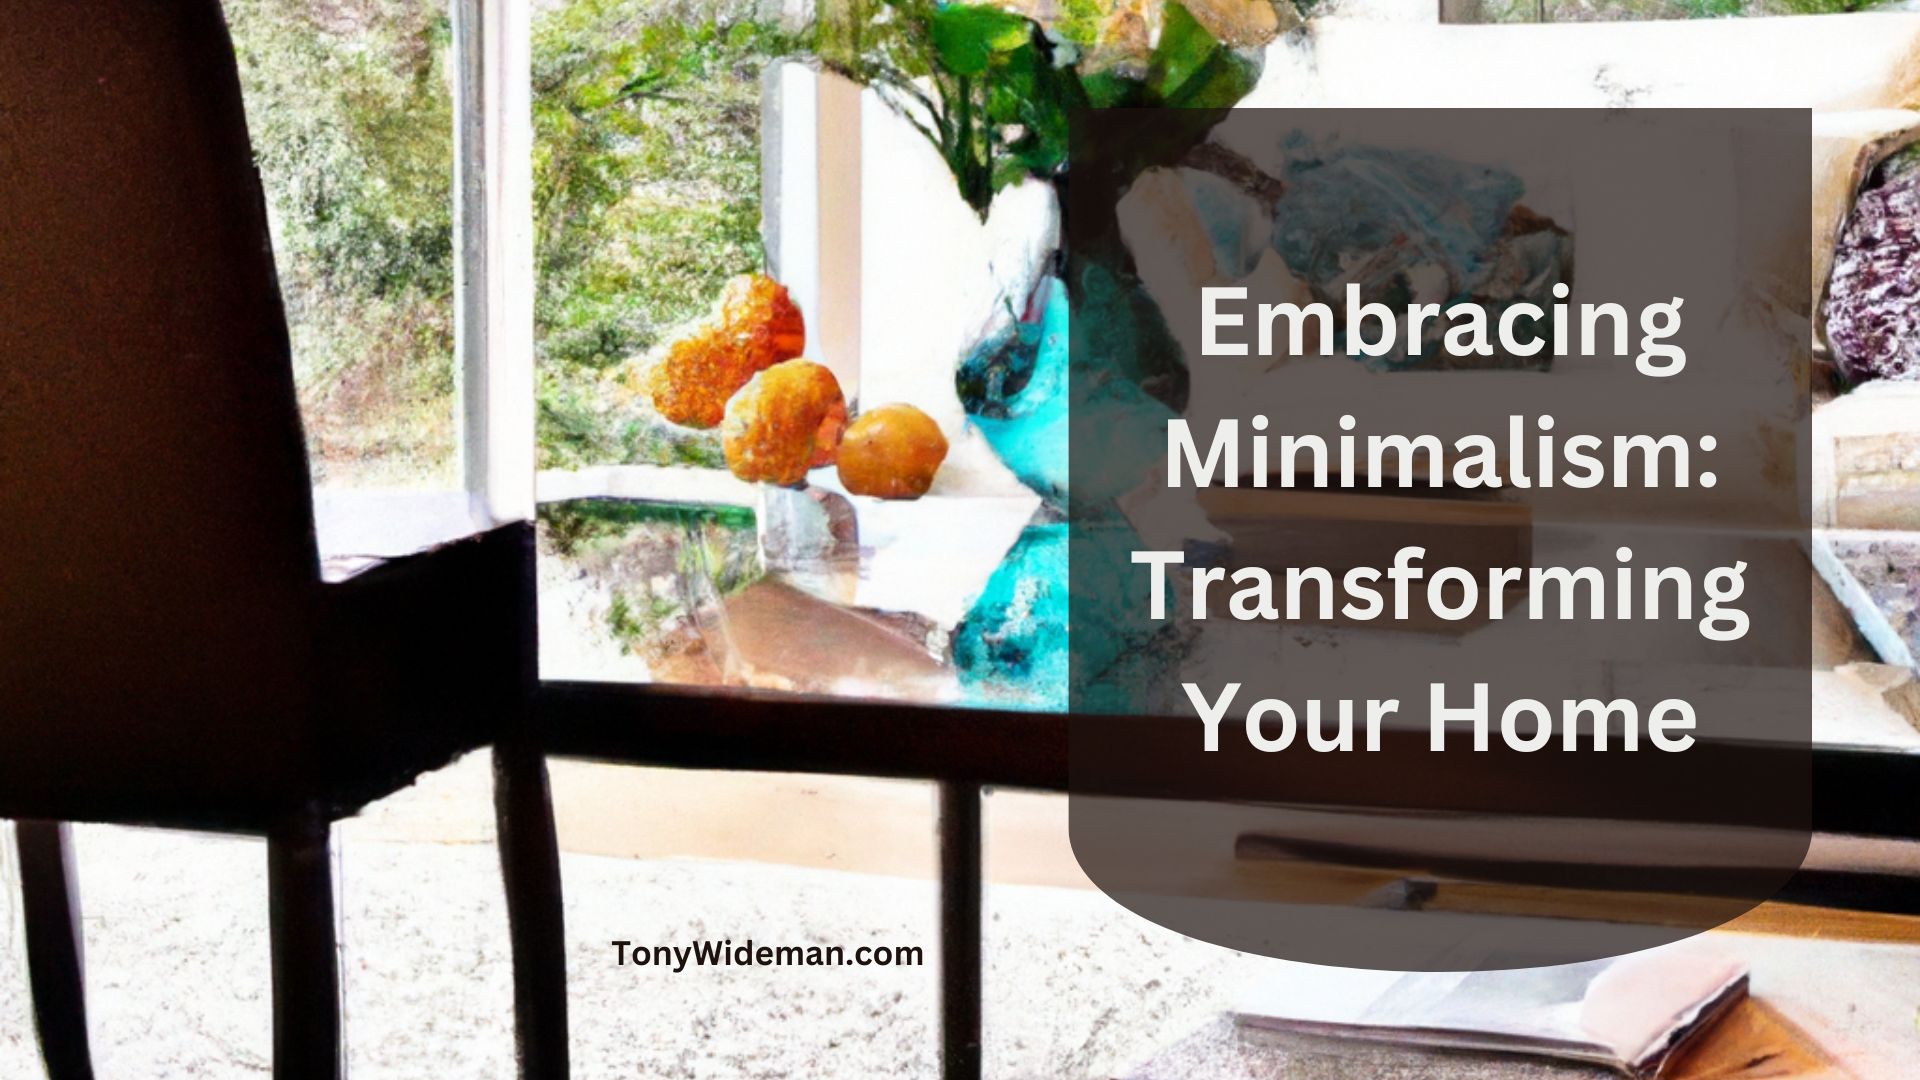 Embracing Minimalism: Transforming Your Home